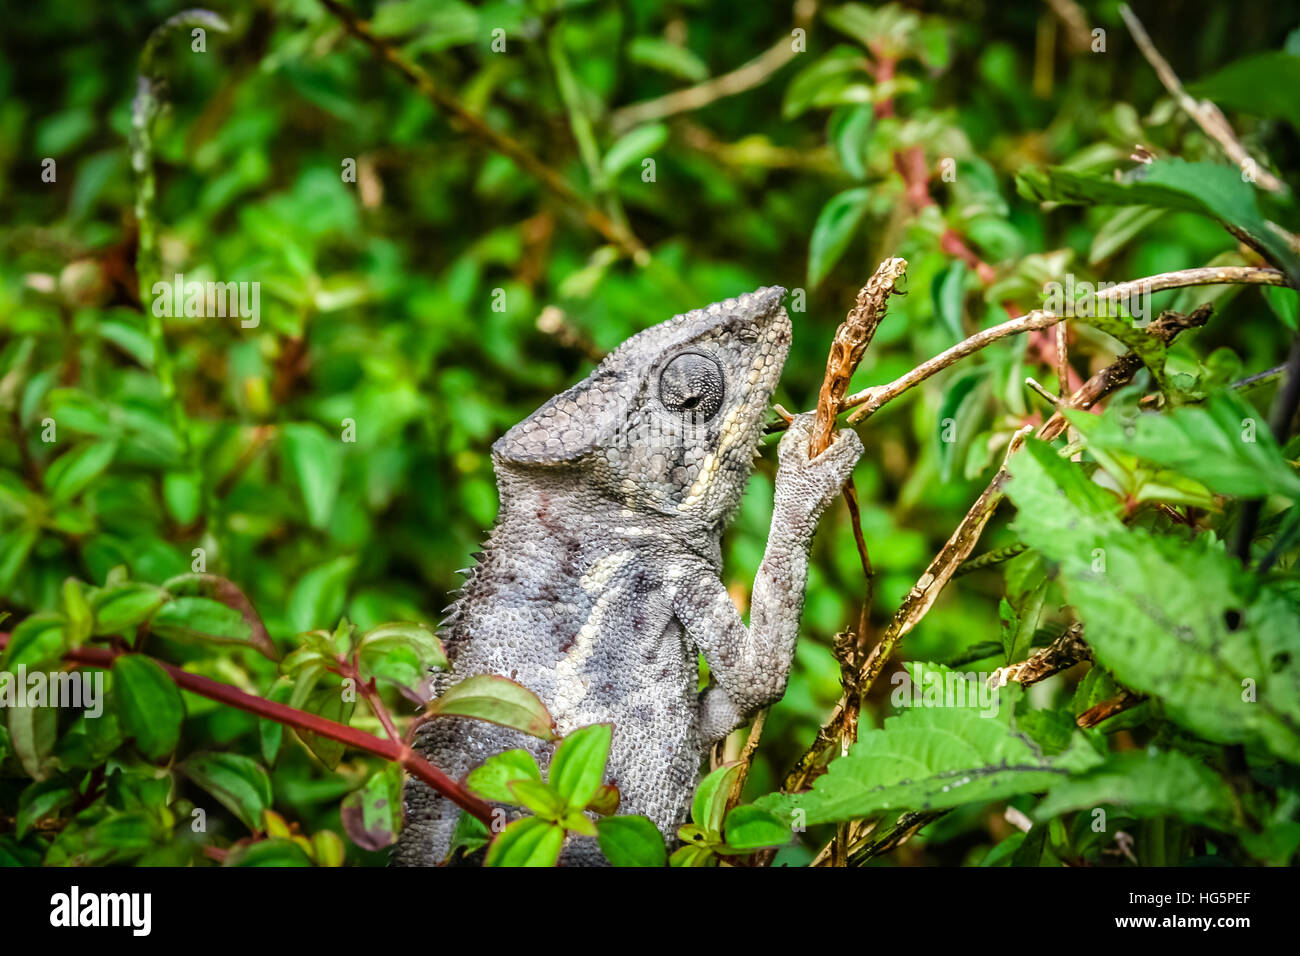 Small chameleon in the tropical madagascar rainforest Stock Photo